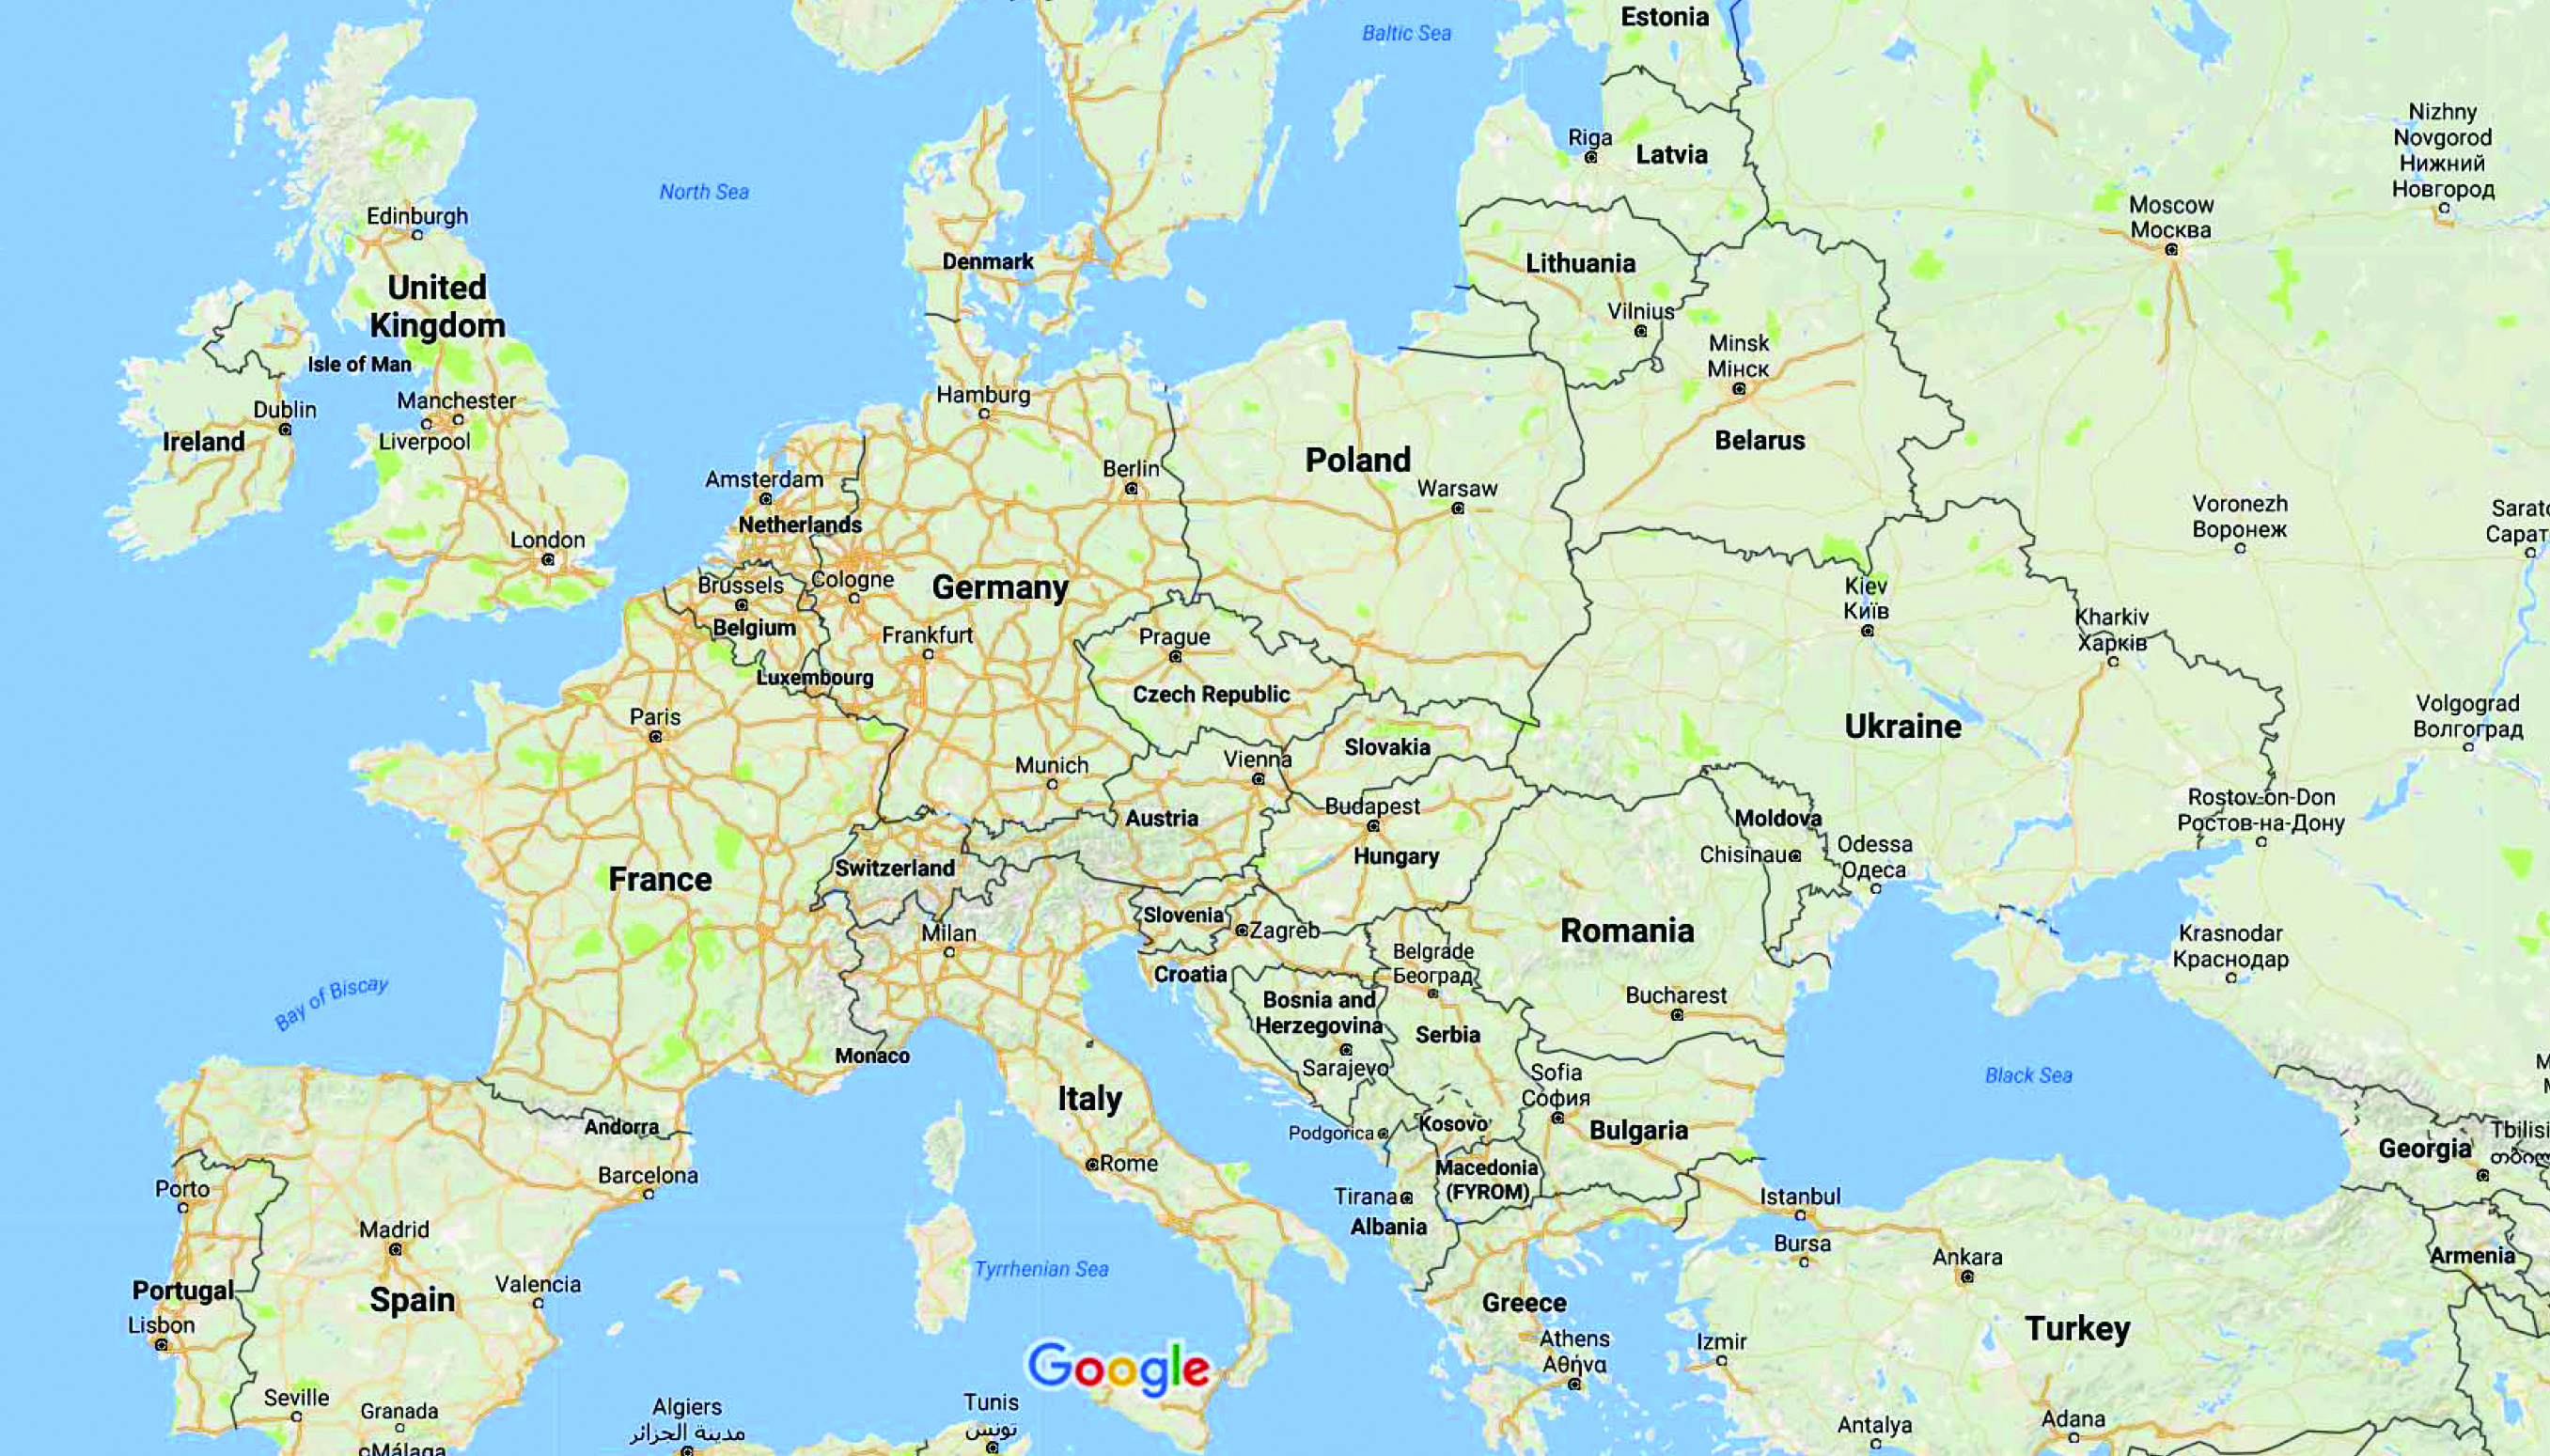 Displayed is a Google Map of the major roadways in Europe.  The most major roadways appear in Germany, France and Italy, with the other countries having far fewer major roadways in them.